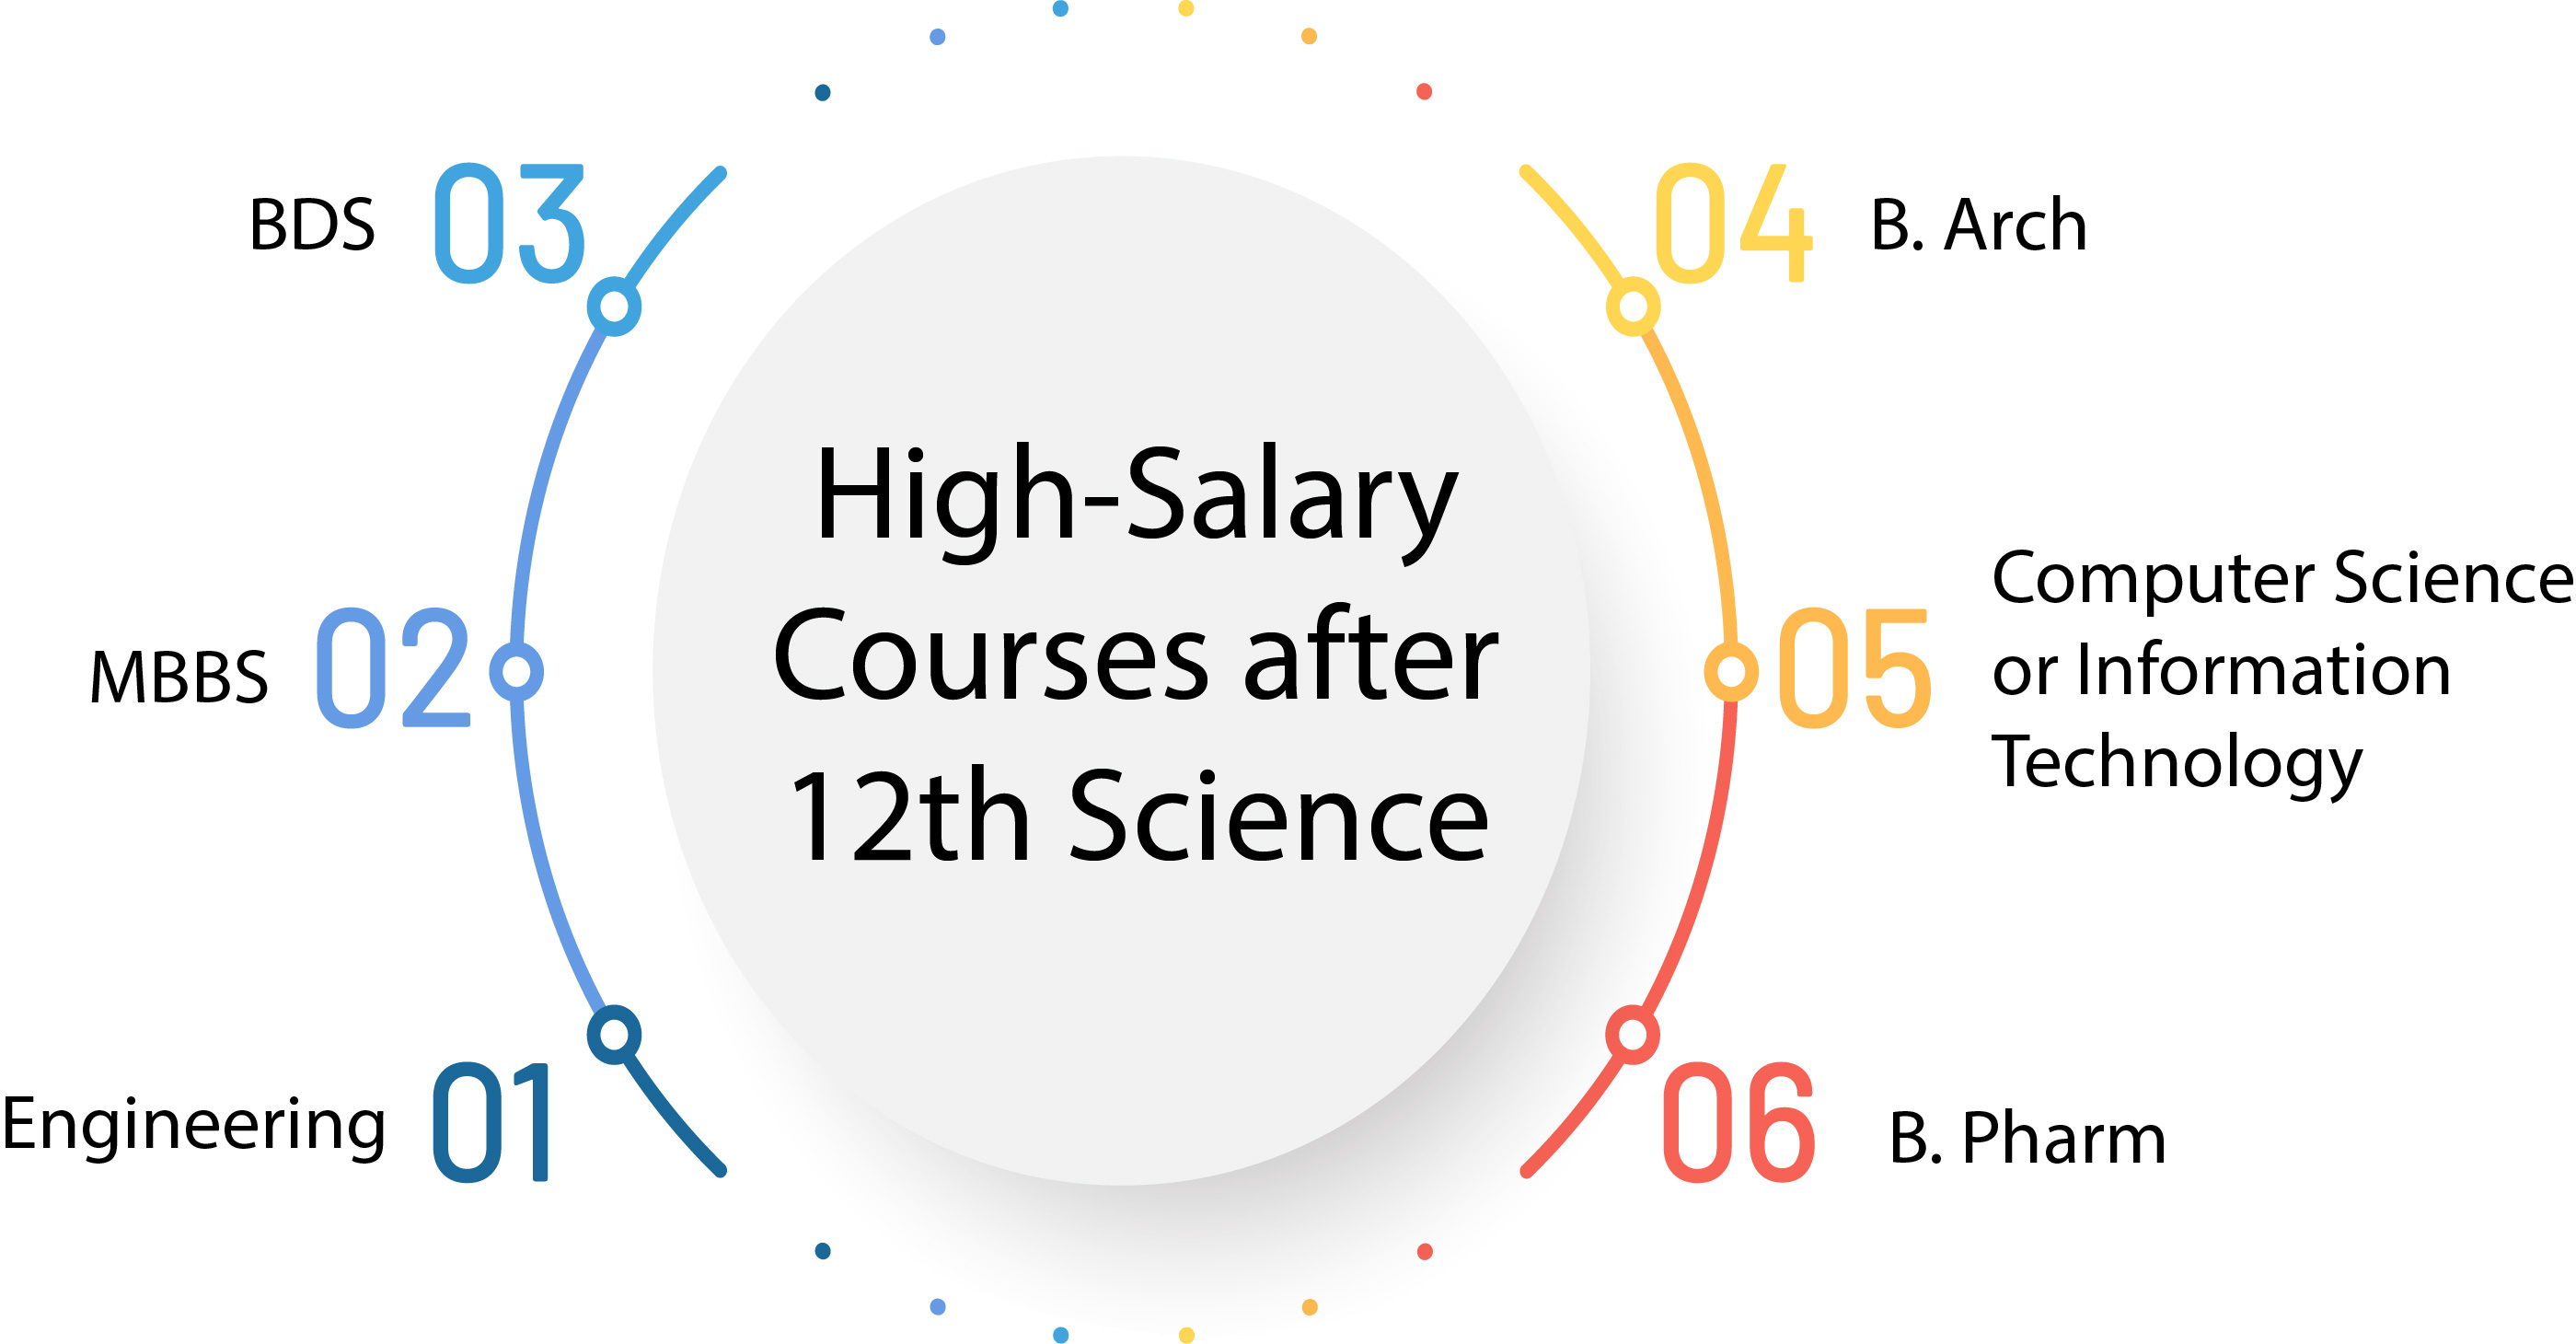 High-Salary Courses after 12th Science